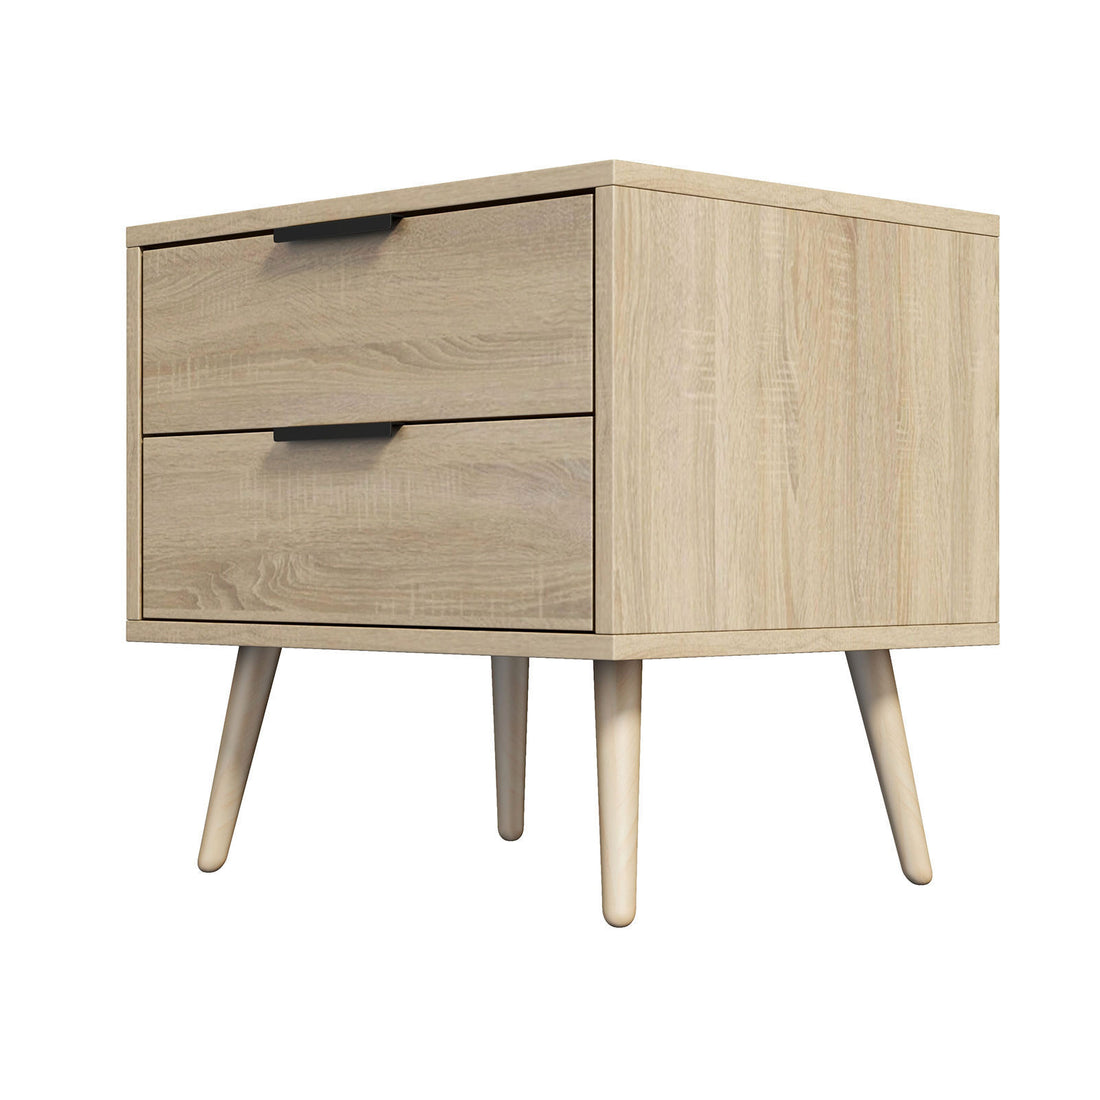 Milano Decor Bedside Table Paddington Drawers Nightstand Unit Cabinet Storage-Bedside Tables-PEROZ Accessories